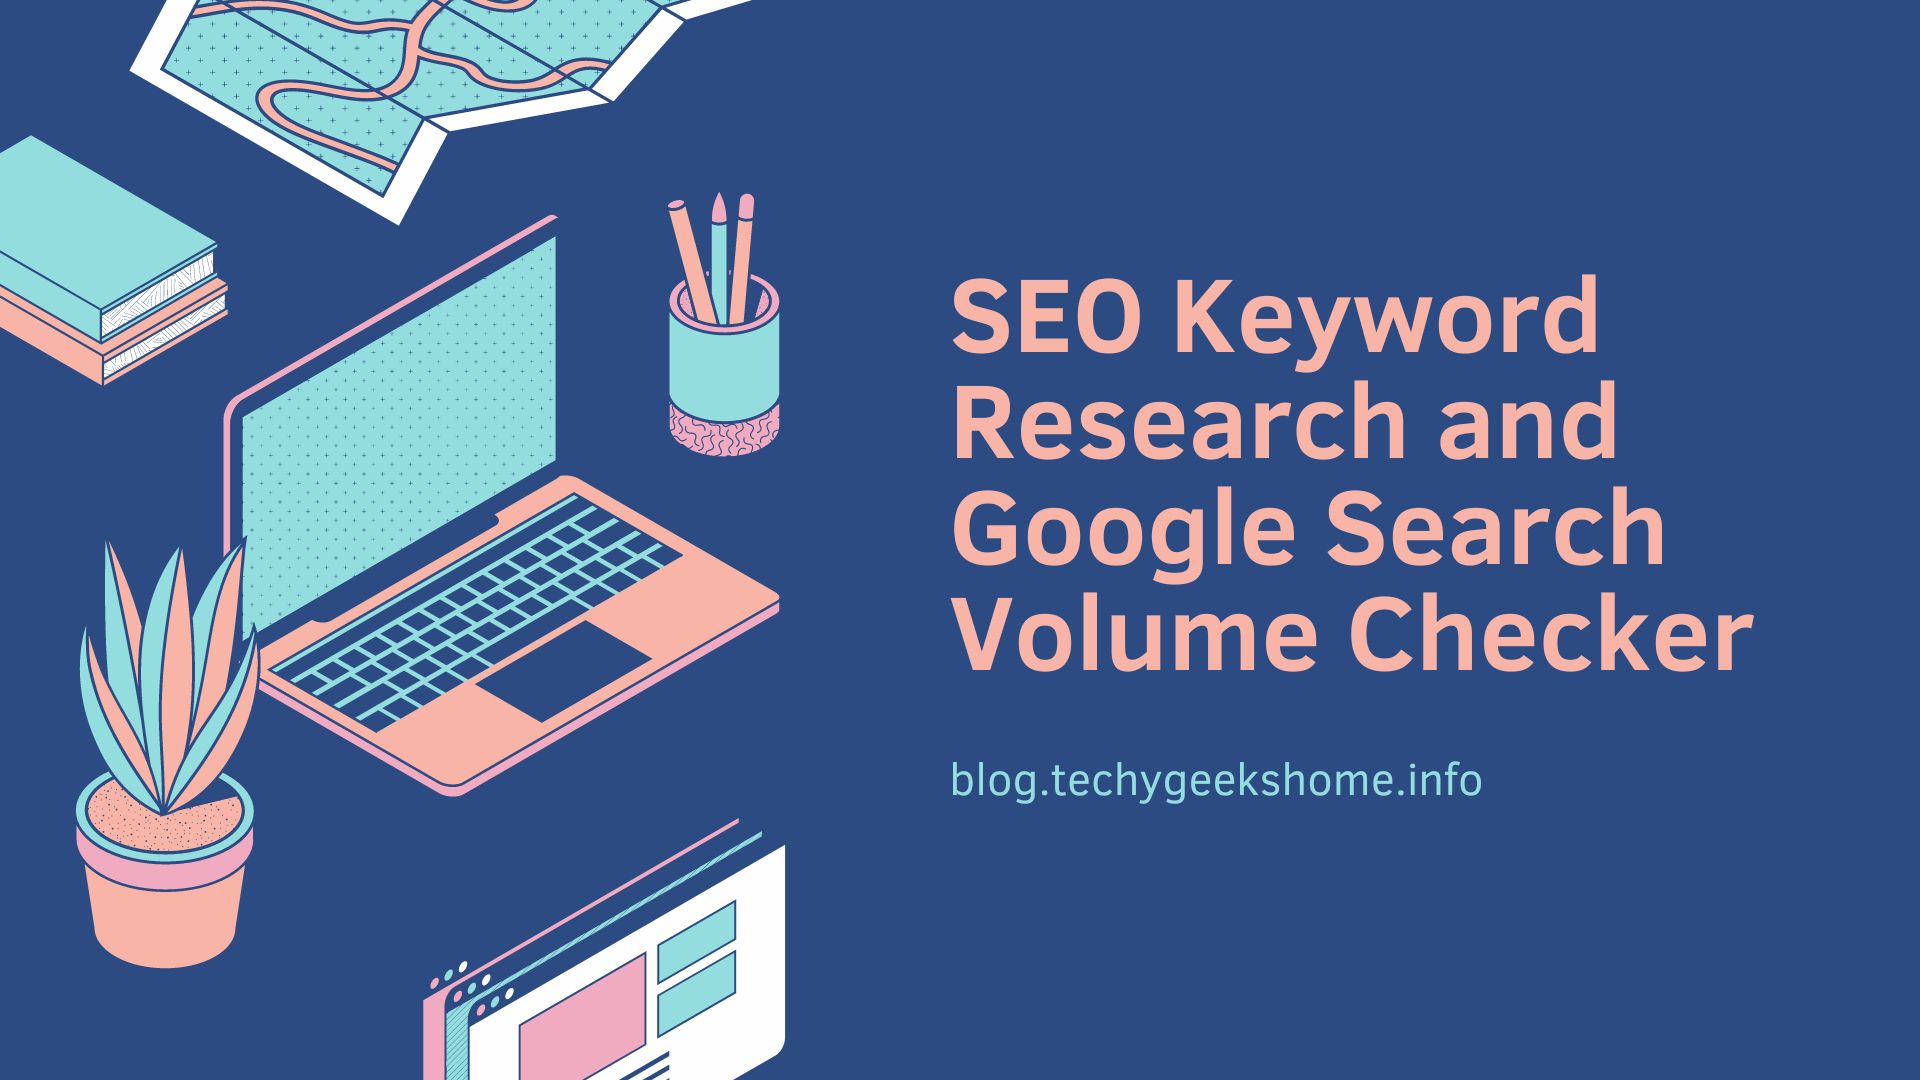 SEO Keyword Research and Google Search Volume Checker 7